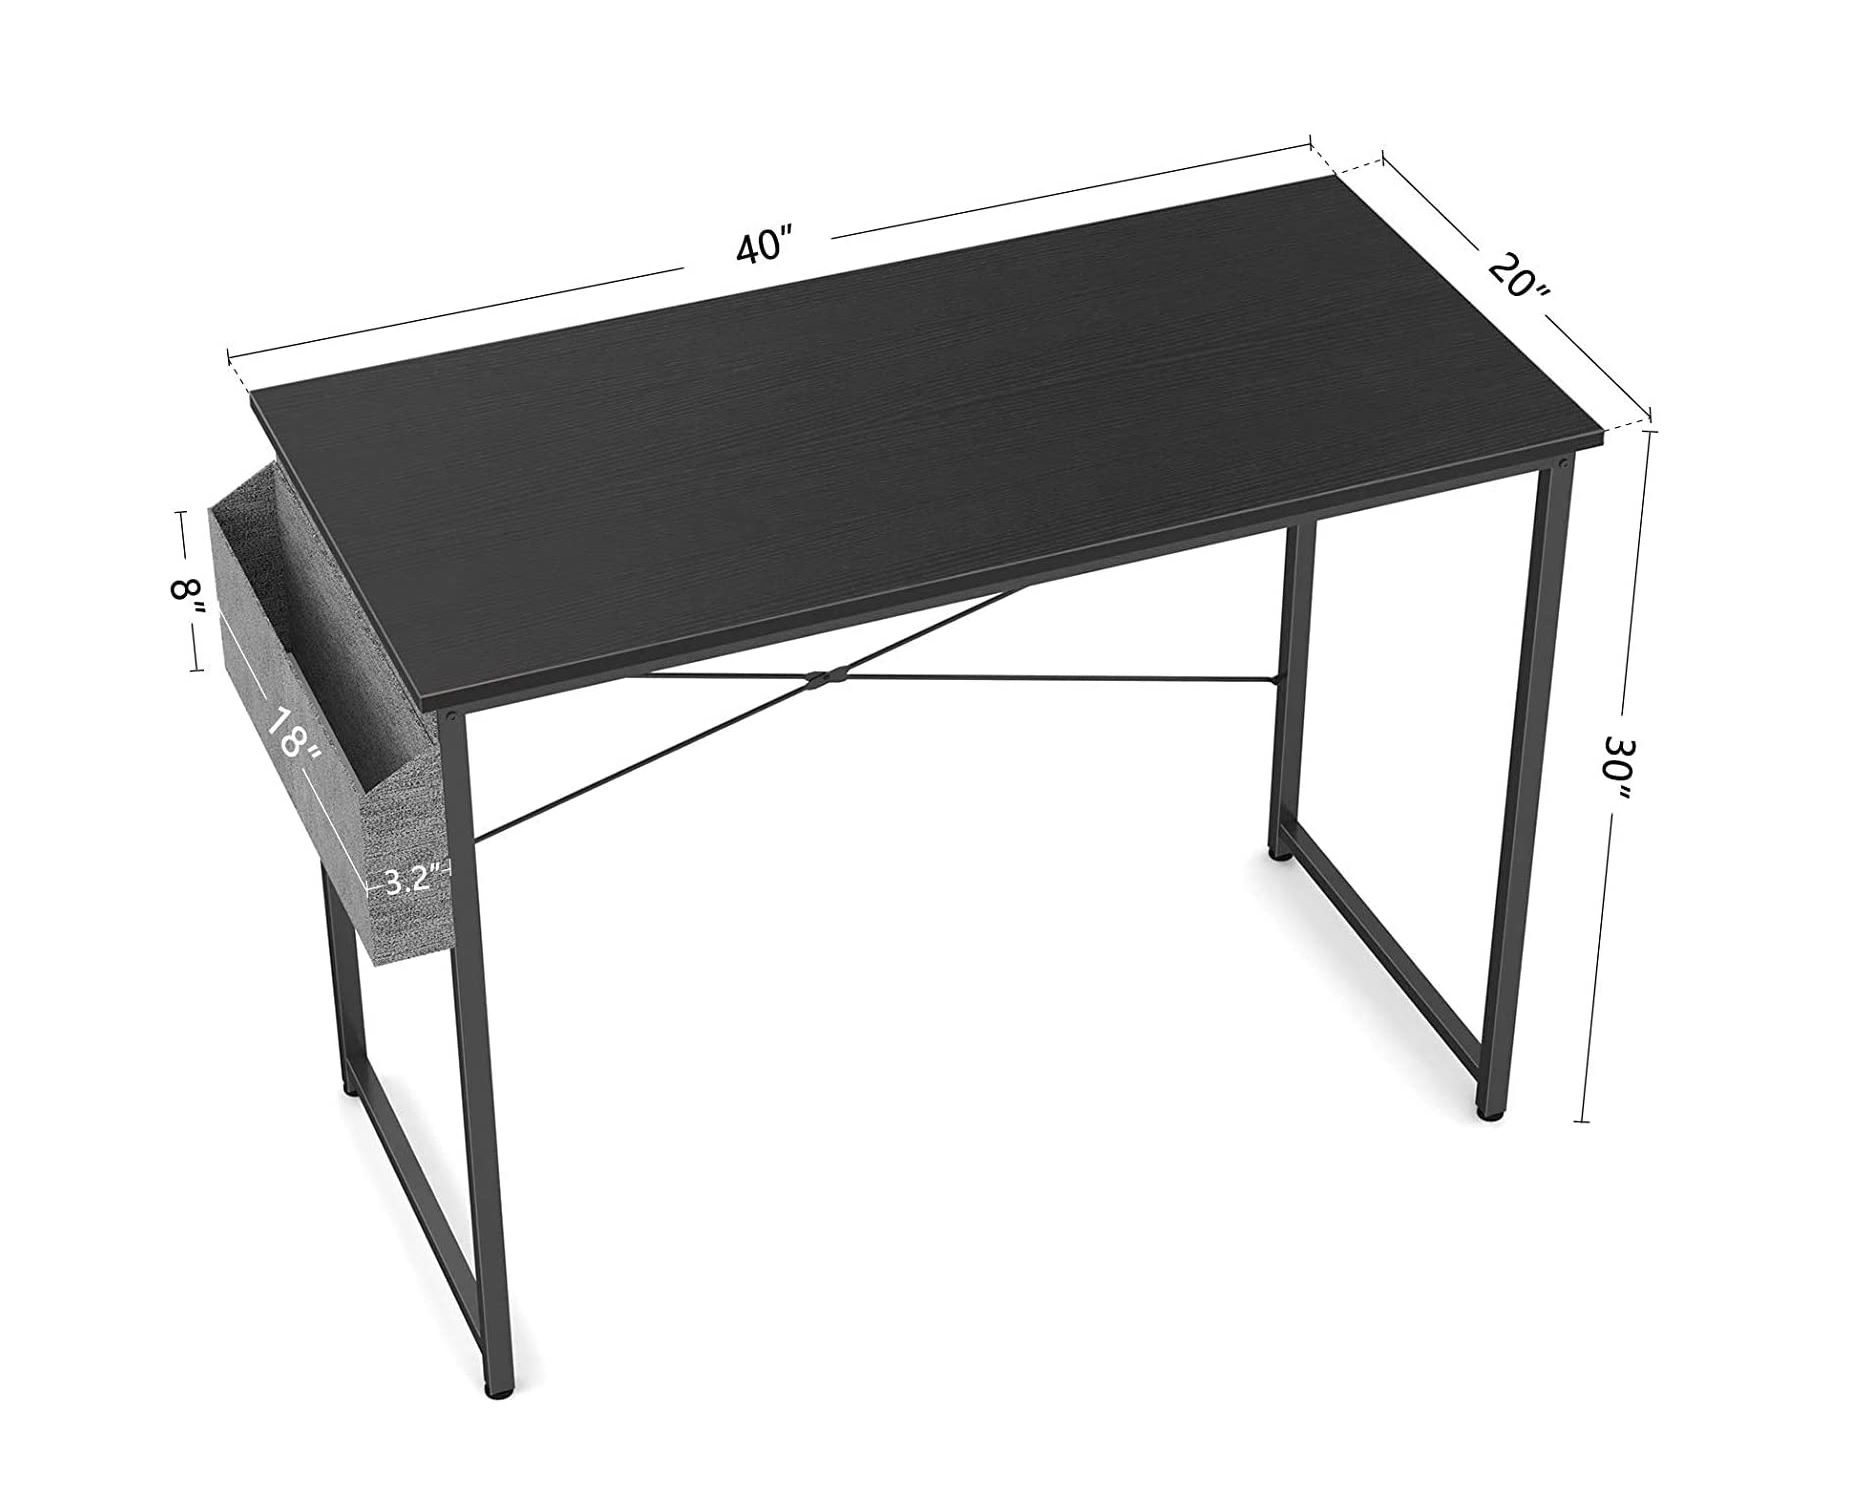 the dimensions of the 40-inch cubiker computer desk